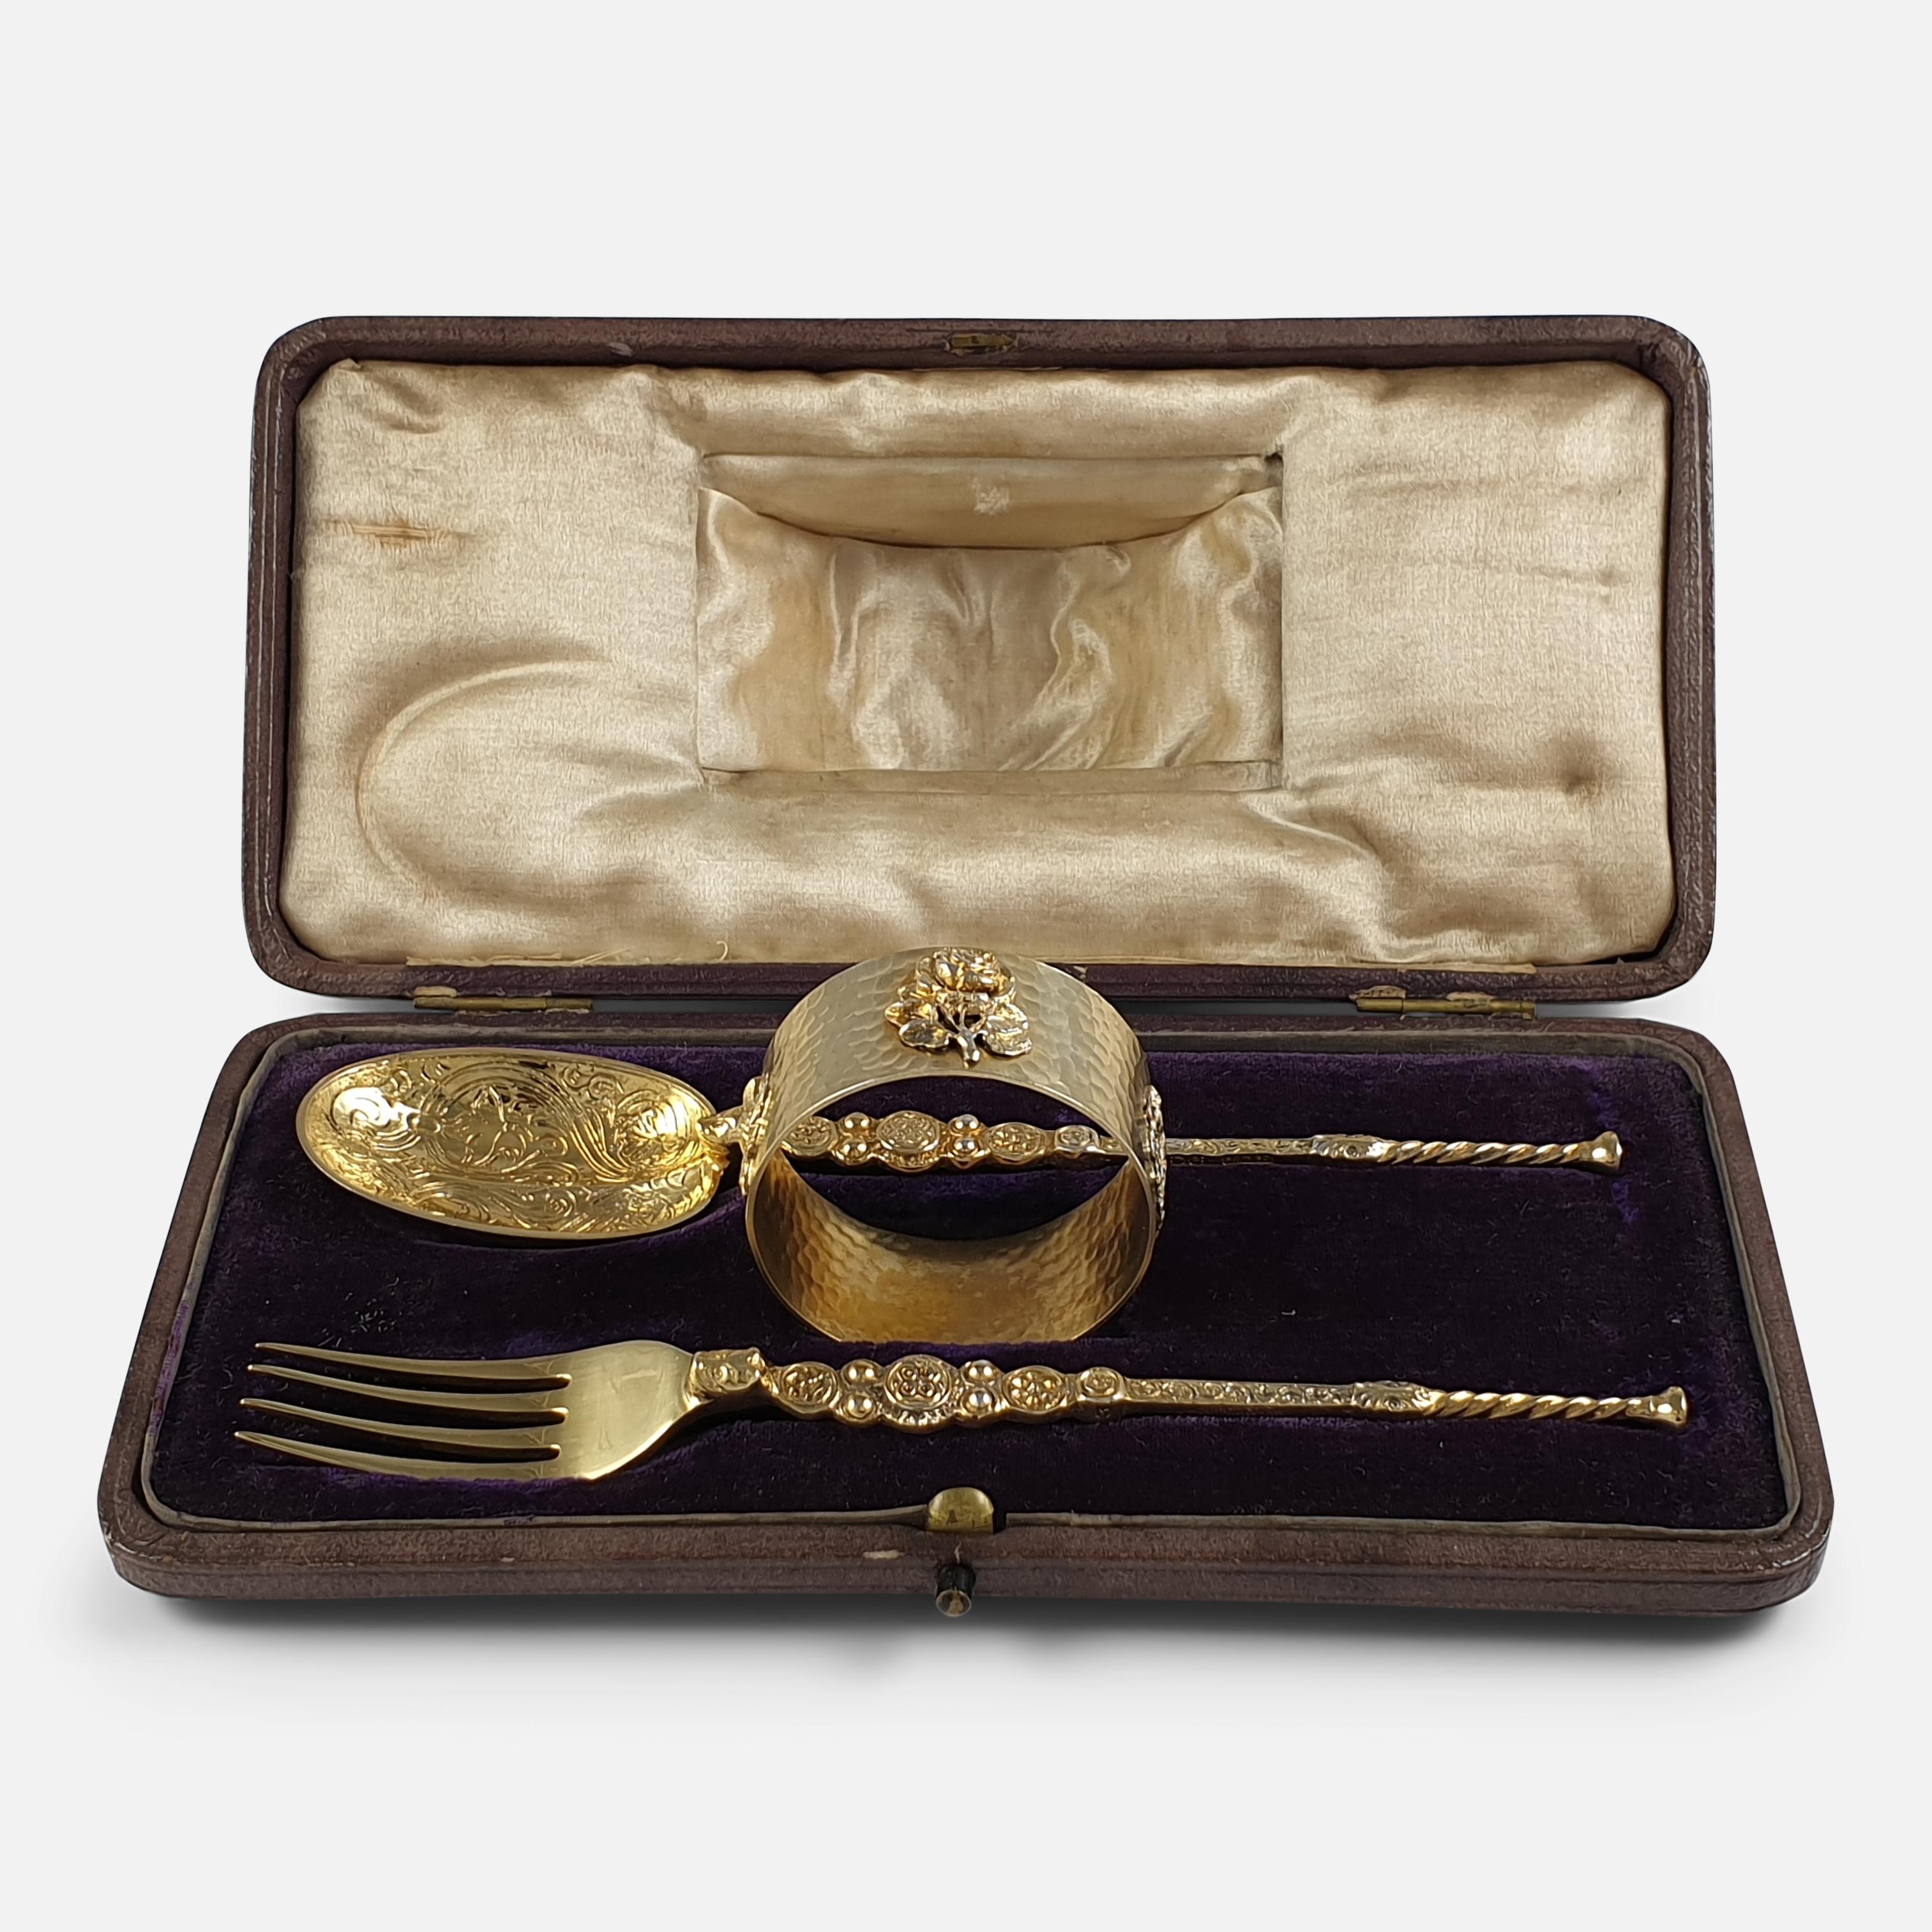 A sterling silver gilt 3-piece christening set that includes a 